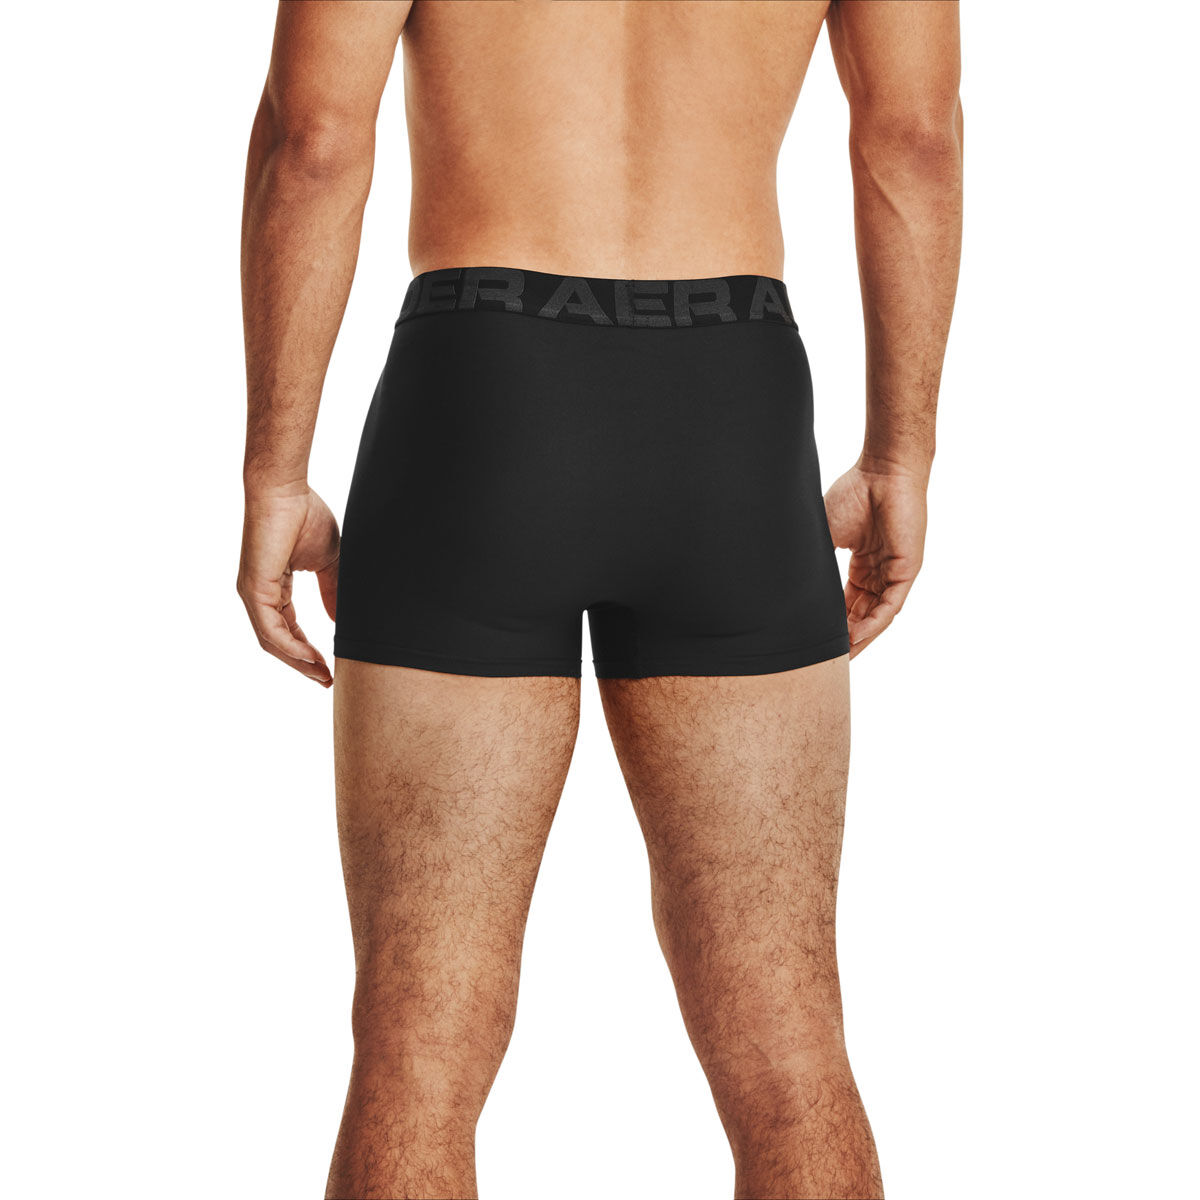 Find more Boys Baseball Underwear/jock Youth Sm/med for sale at up to 90%  off